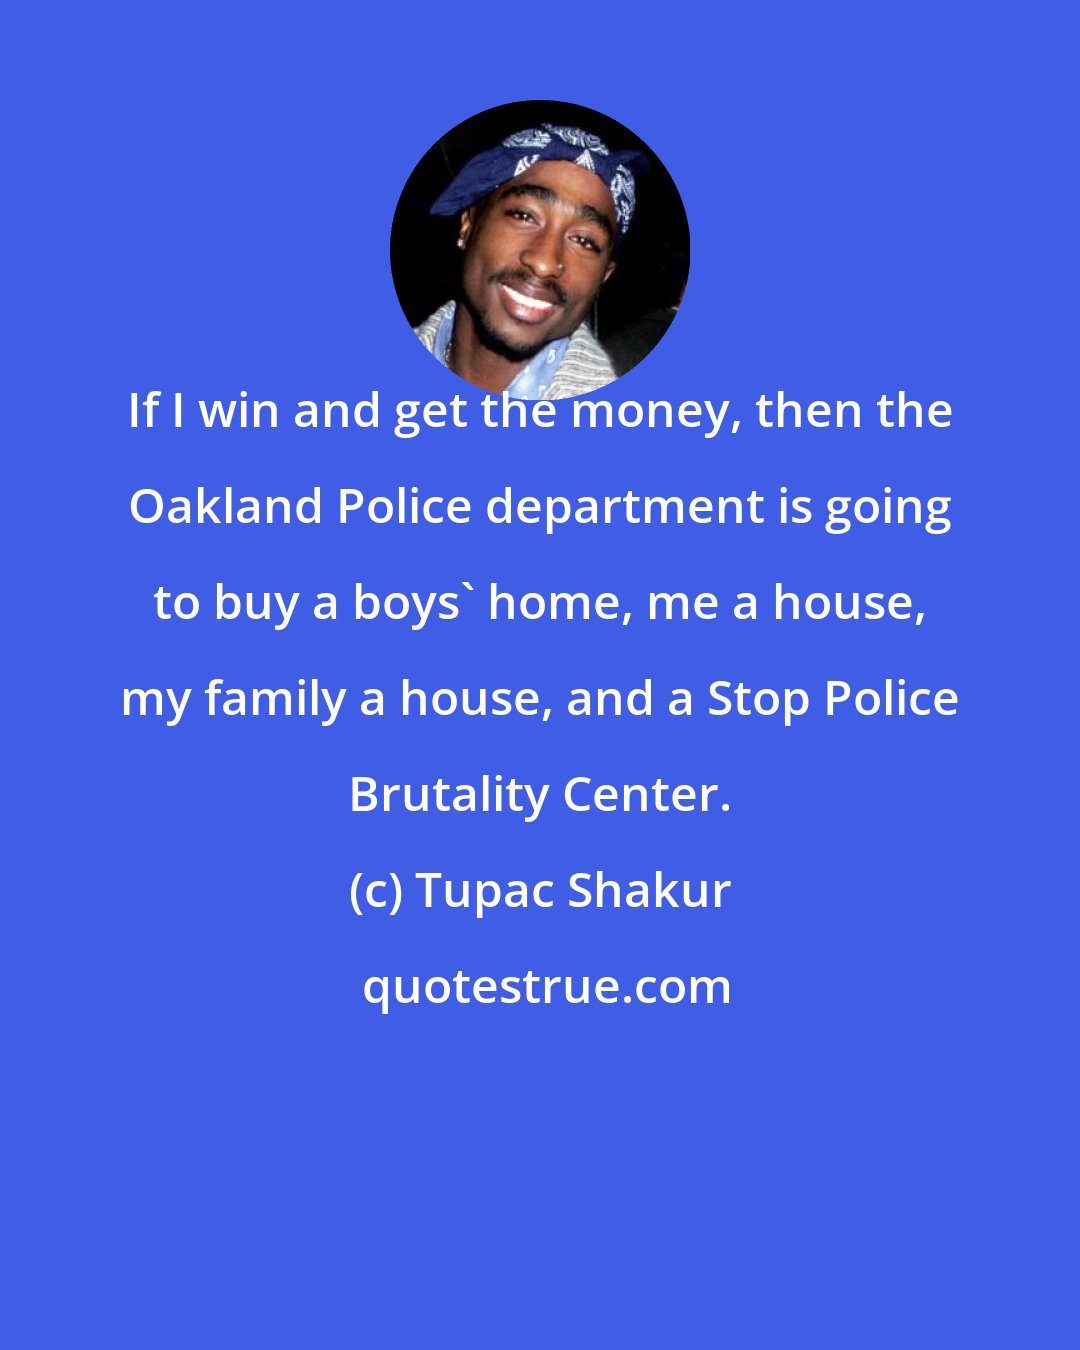 Tupac Shakur: If I win and get the money, then the Oakland Police department is going to buy a boys' home, me a house, my family a house, and a Stop Police Brutality Center.